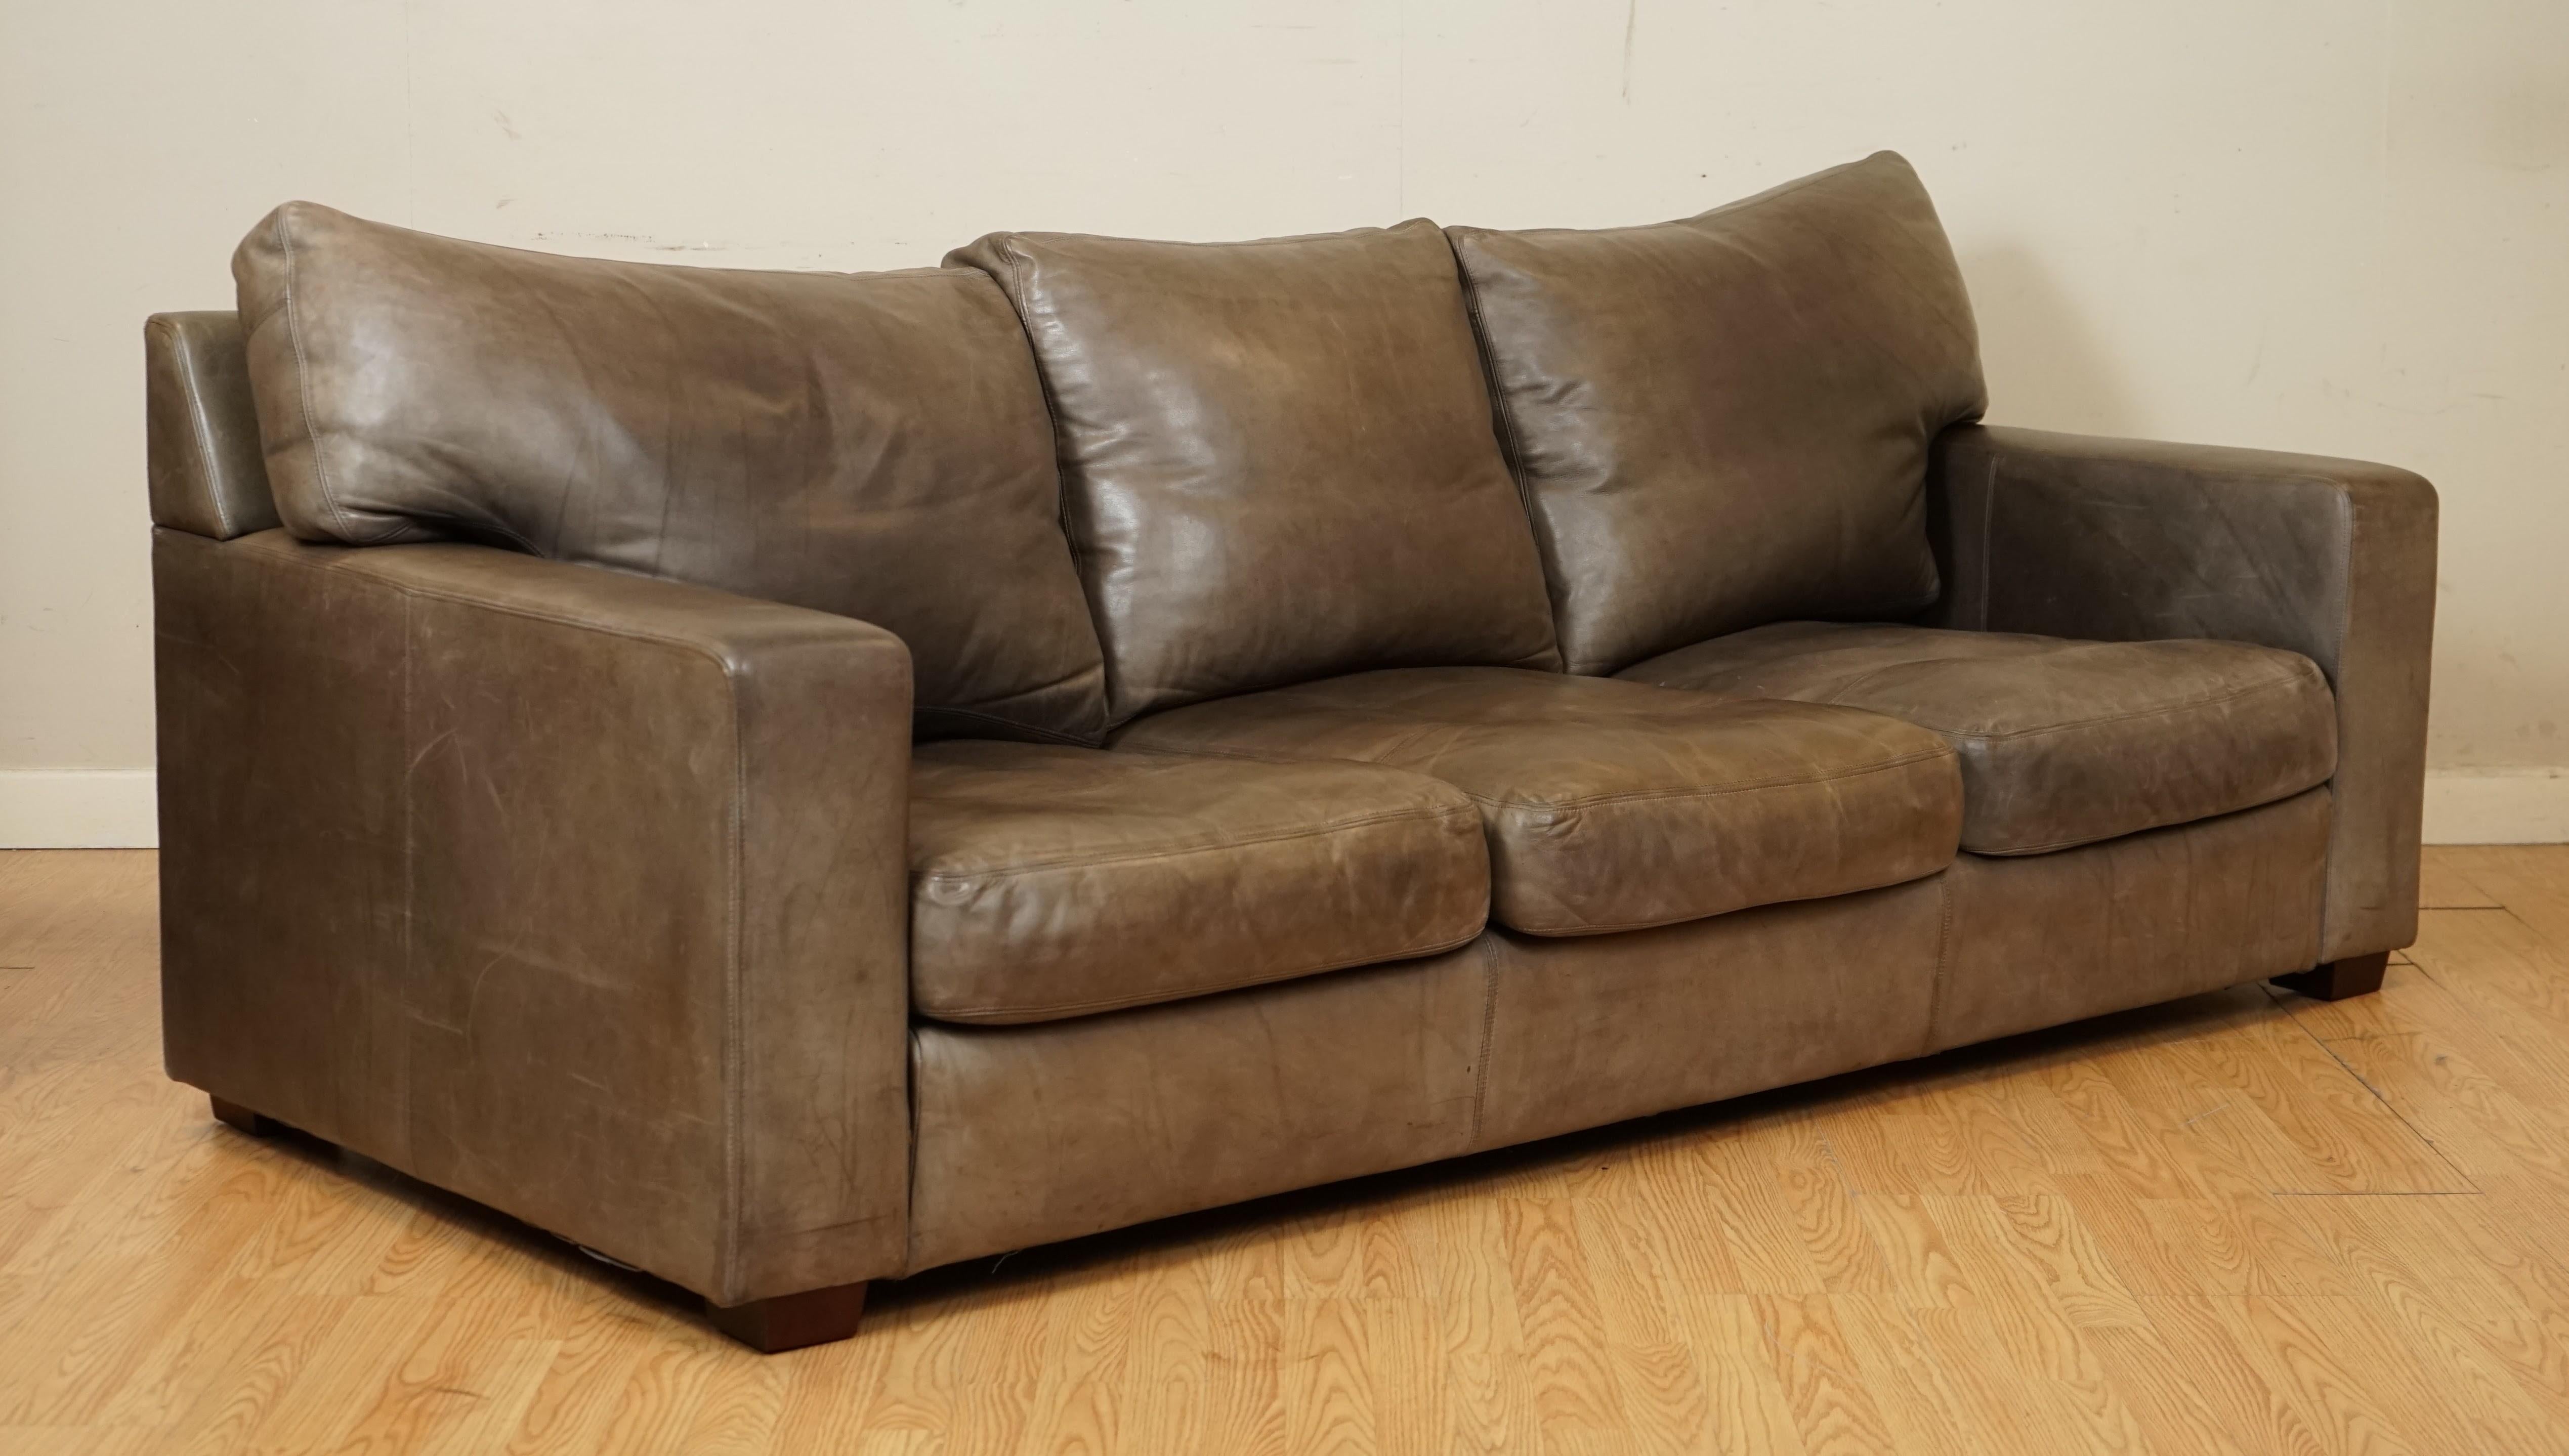 We are so excited to present to you this Beautiful Buttery Soft Leather Collins & Hayes Sofa.

This sofa is a very well made a solid piece, costing around £3,000 new. The arms are removable, so it can manouver better to get inside your home and